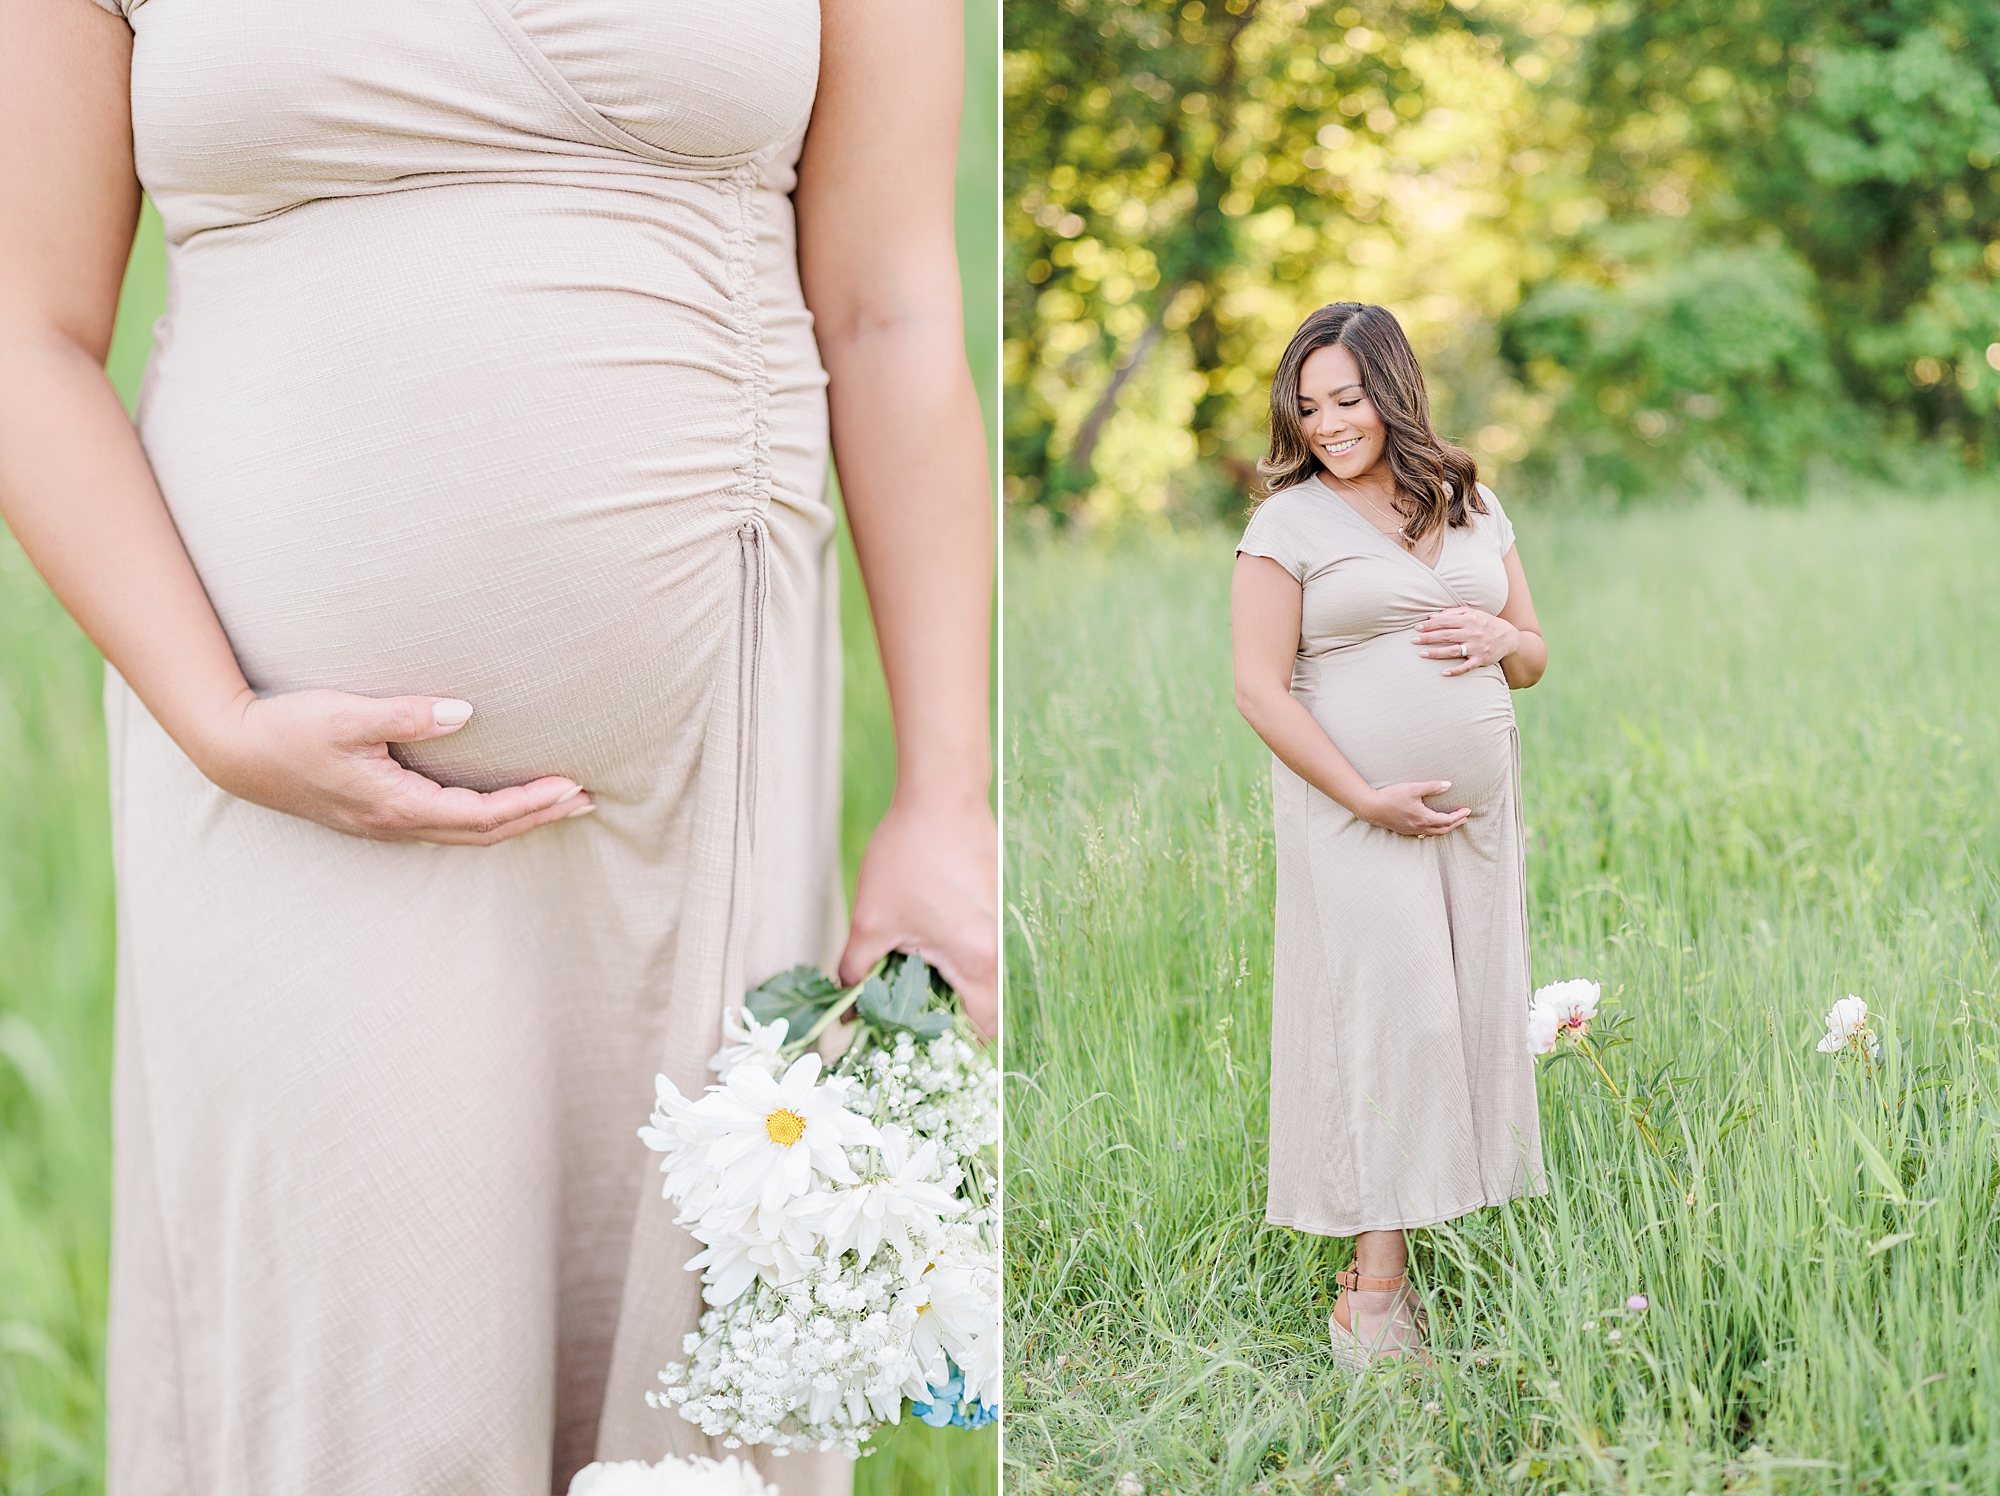 woman in tan dress holds bouquet of daises while holding baby bump